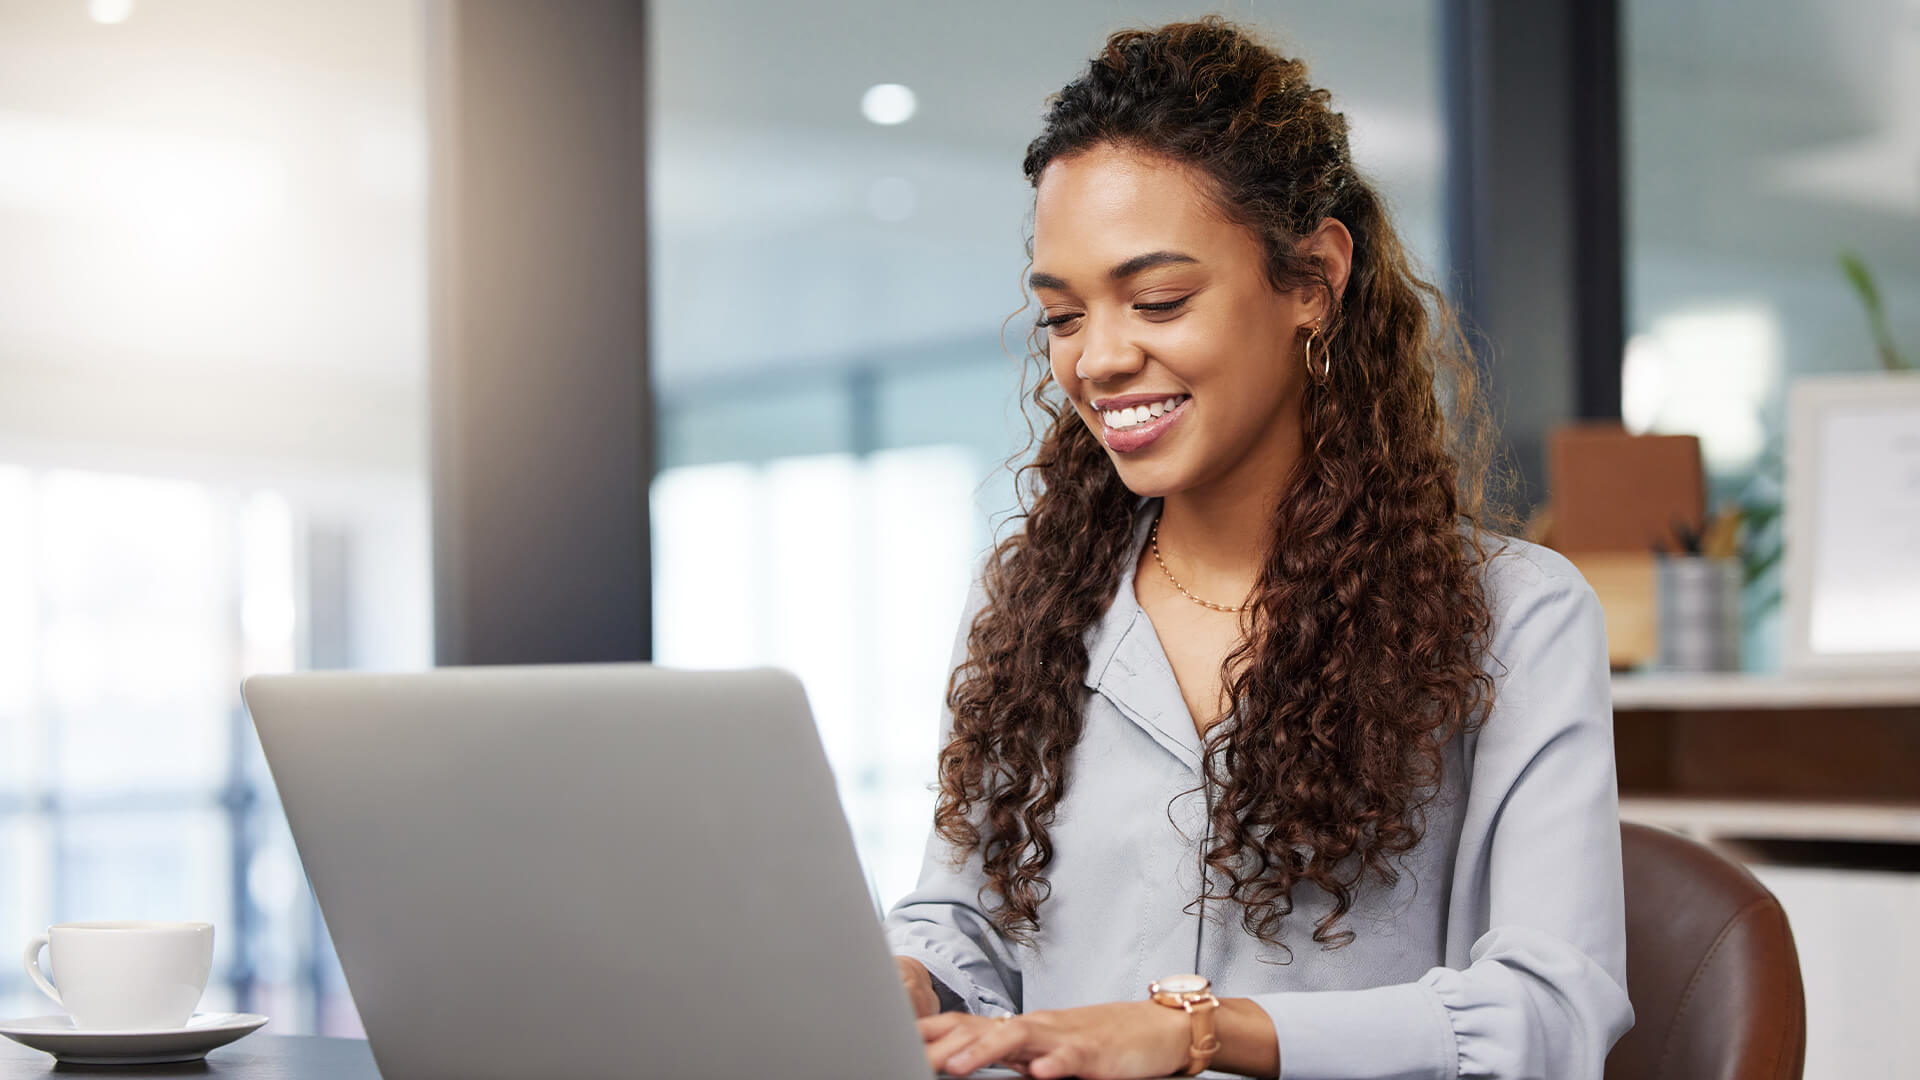 woman using laptop and smiling